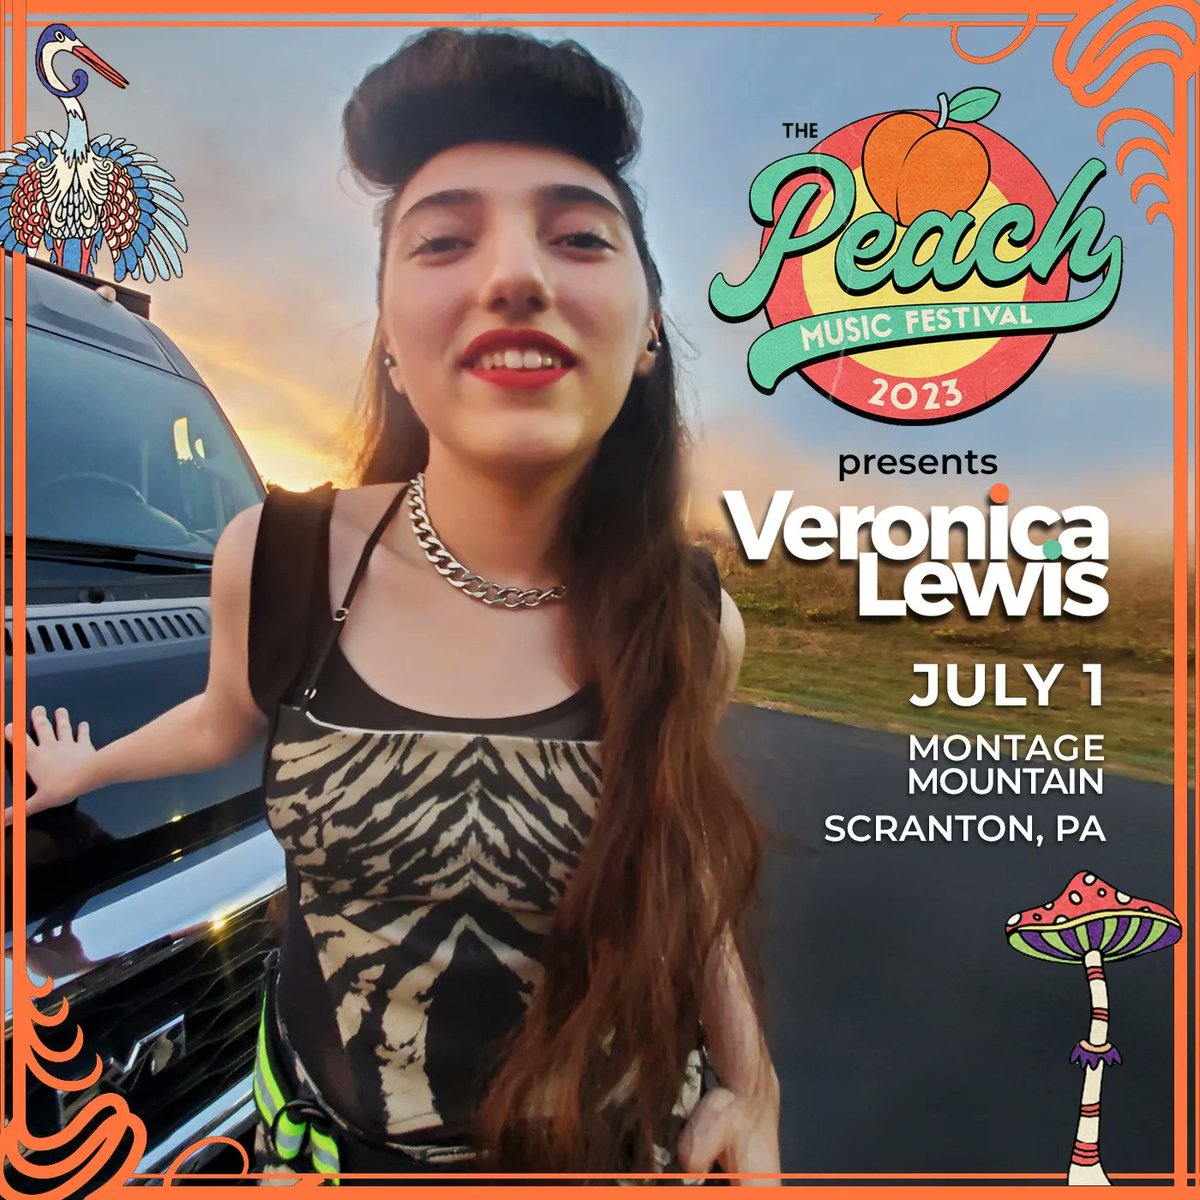 It's happening July 29 - July 2 @PeachMusicFest 💙 so stoked to be performing! thepeachmusicfestival.com/festival-passe… #peachmusicfestival #peachmusic #peachmusicfestival #peachmusic #peachmusicfestpeachmusicfest